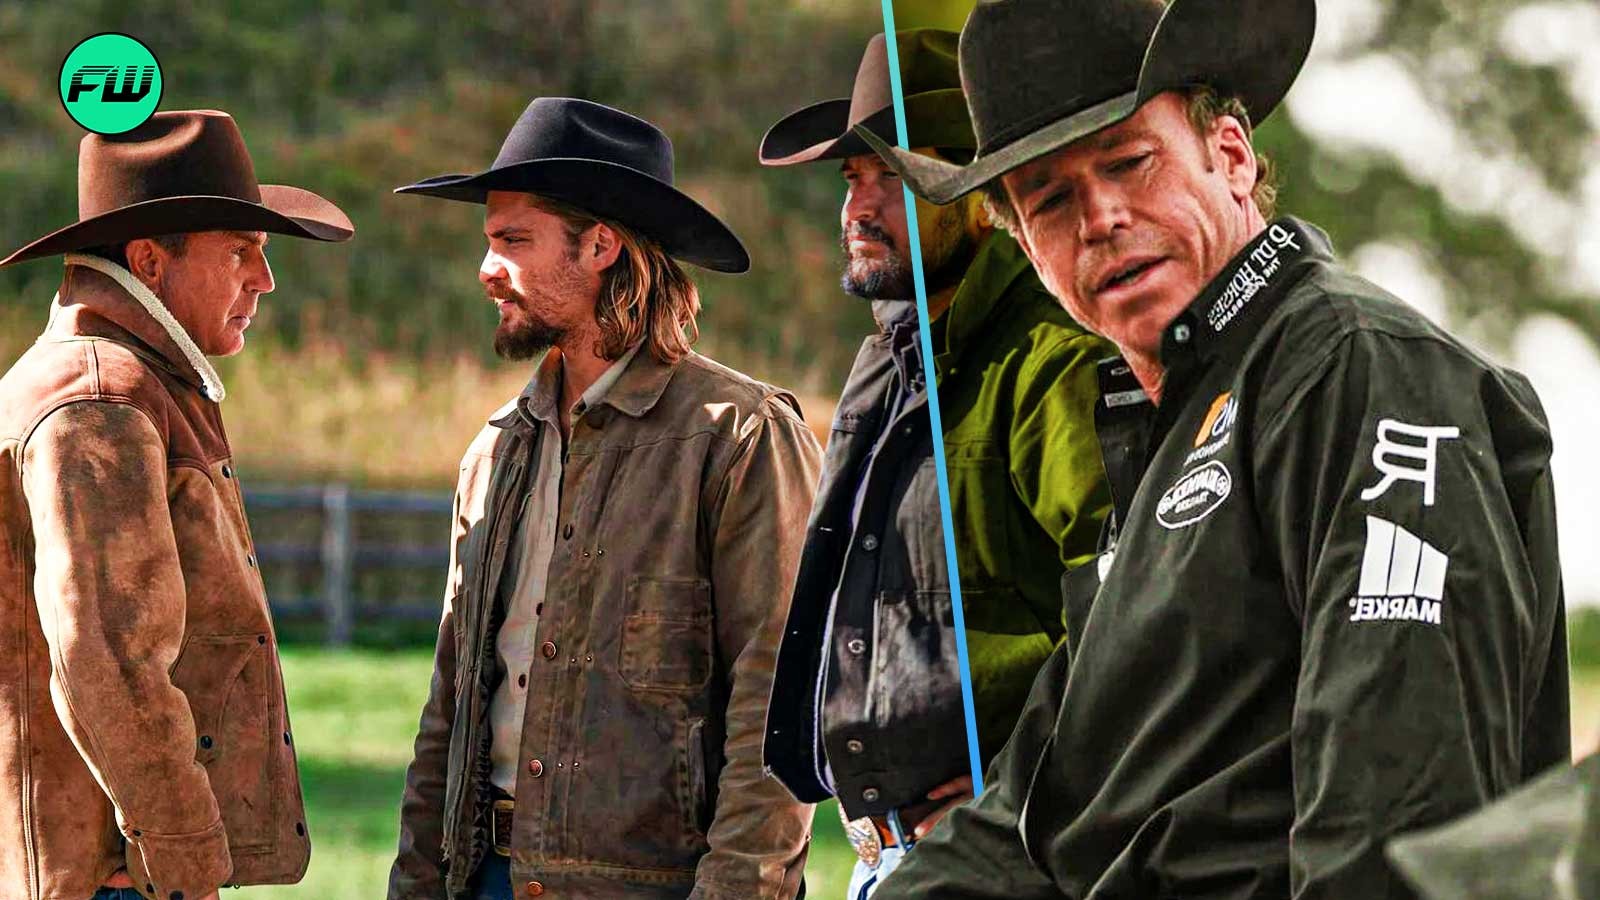 Yellowstone fans are not impressed with Taylor Sheridan’s portrayal of a “s*x siren” in the show, which some fans consider to be completely miscast